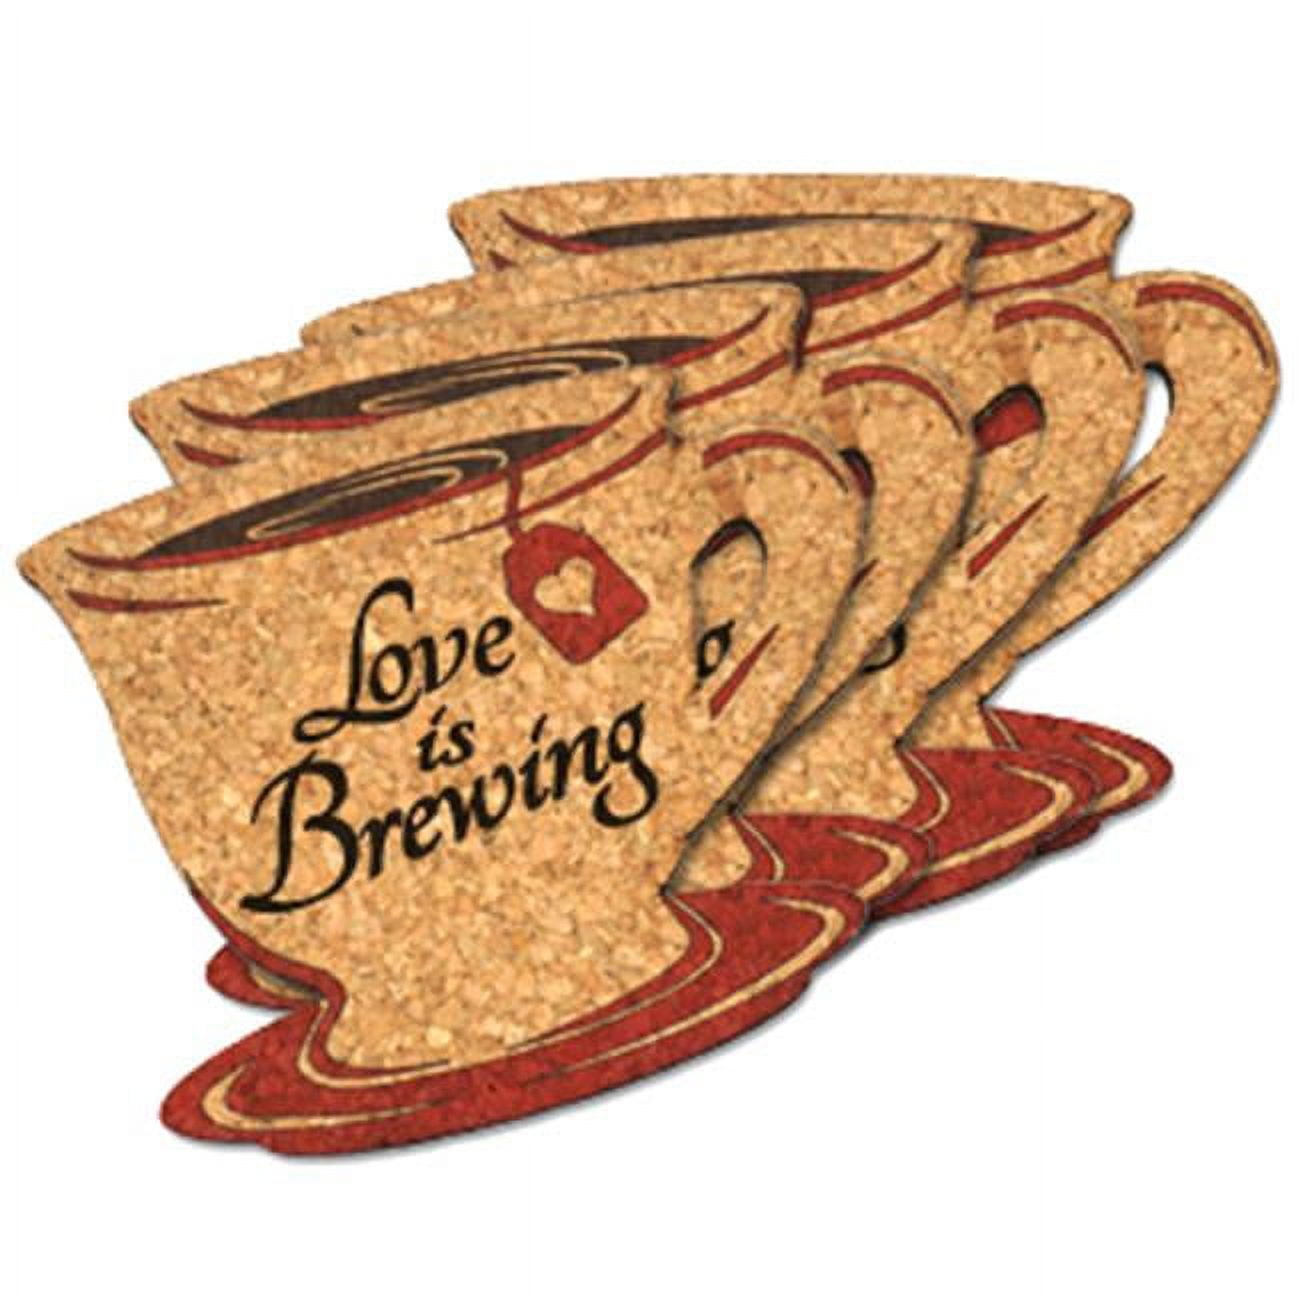 Picture of Ducky Days 8497193 4.5 x 4 in. Love is Brewing Tea Cup Cork Coaster Wedding Favors - Set of 4